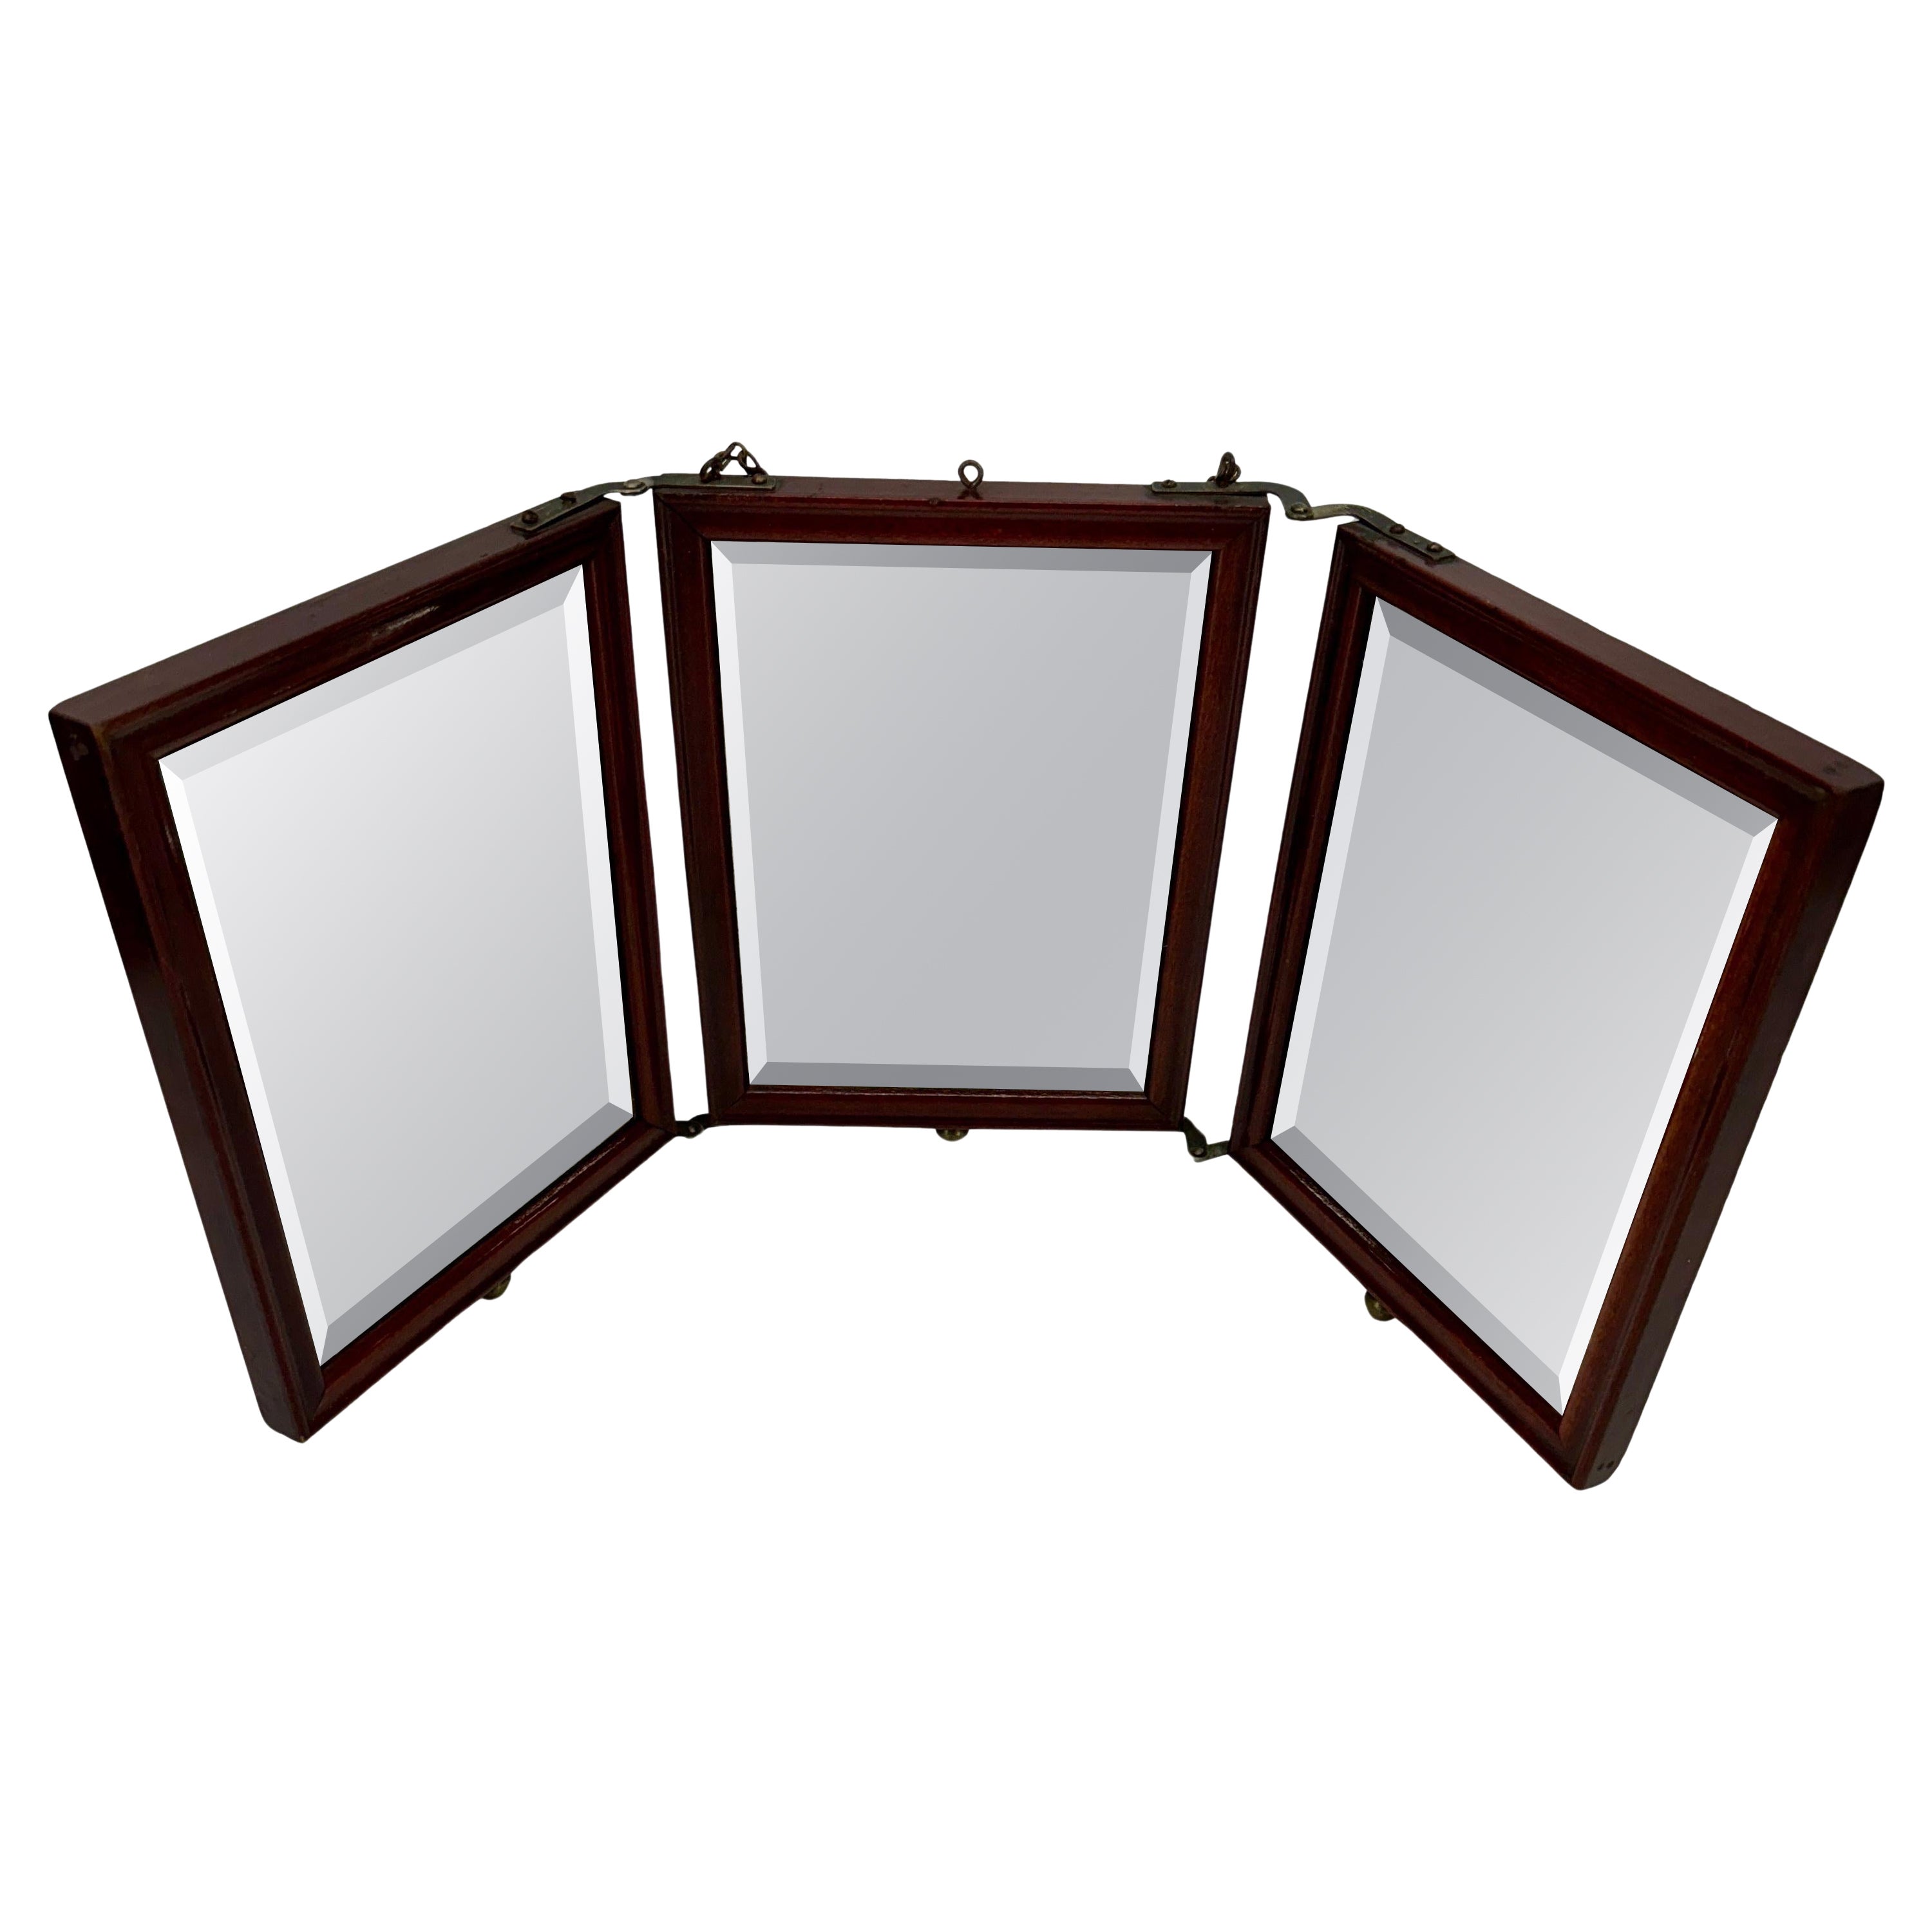 Tri-Fold Travel Vanity Or Dresser Mirror With Beveled Glass For Sale